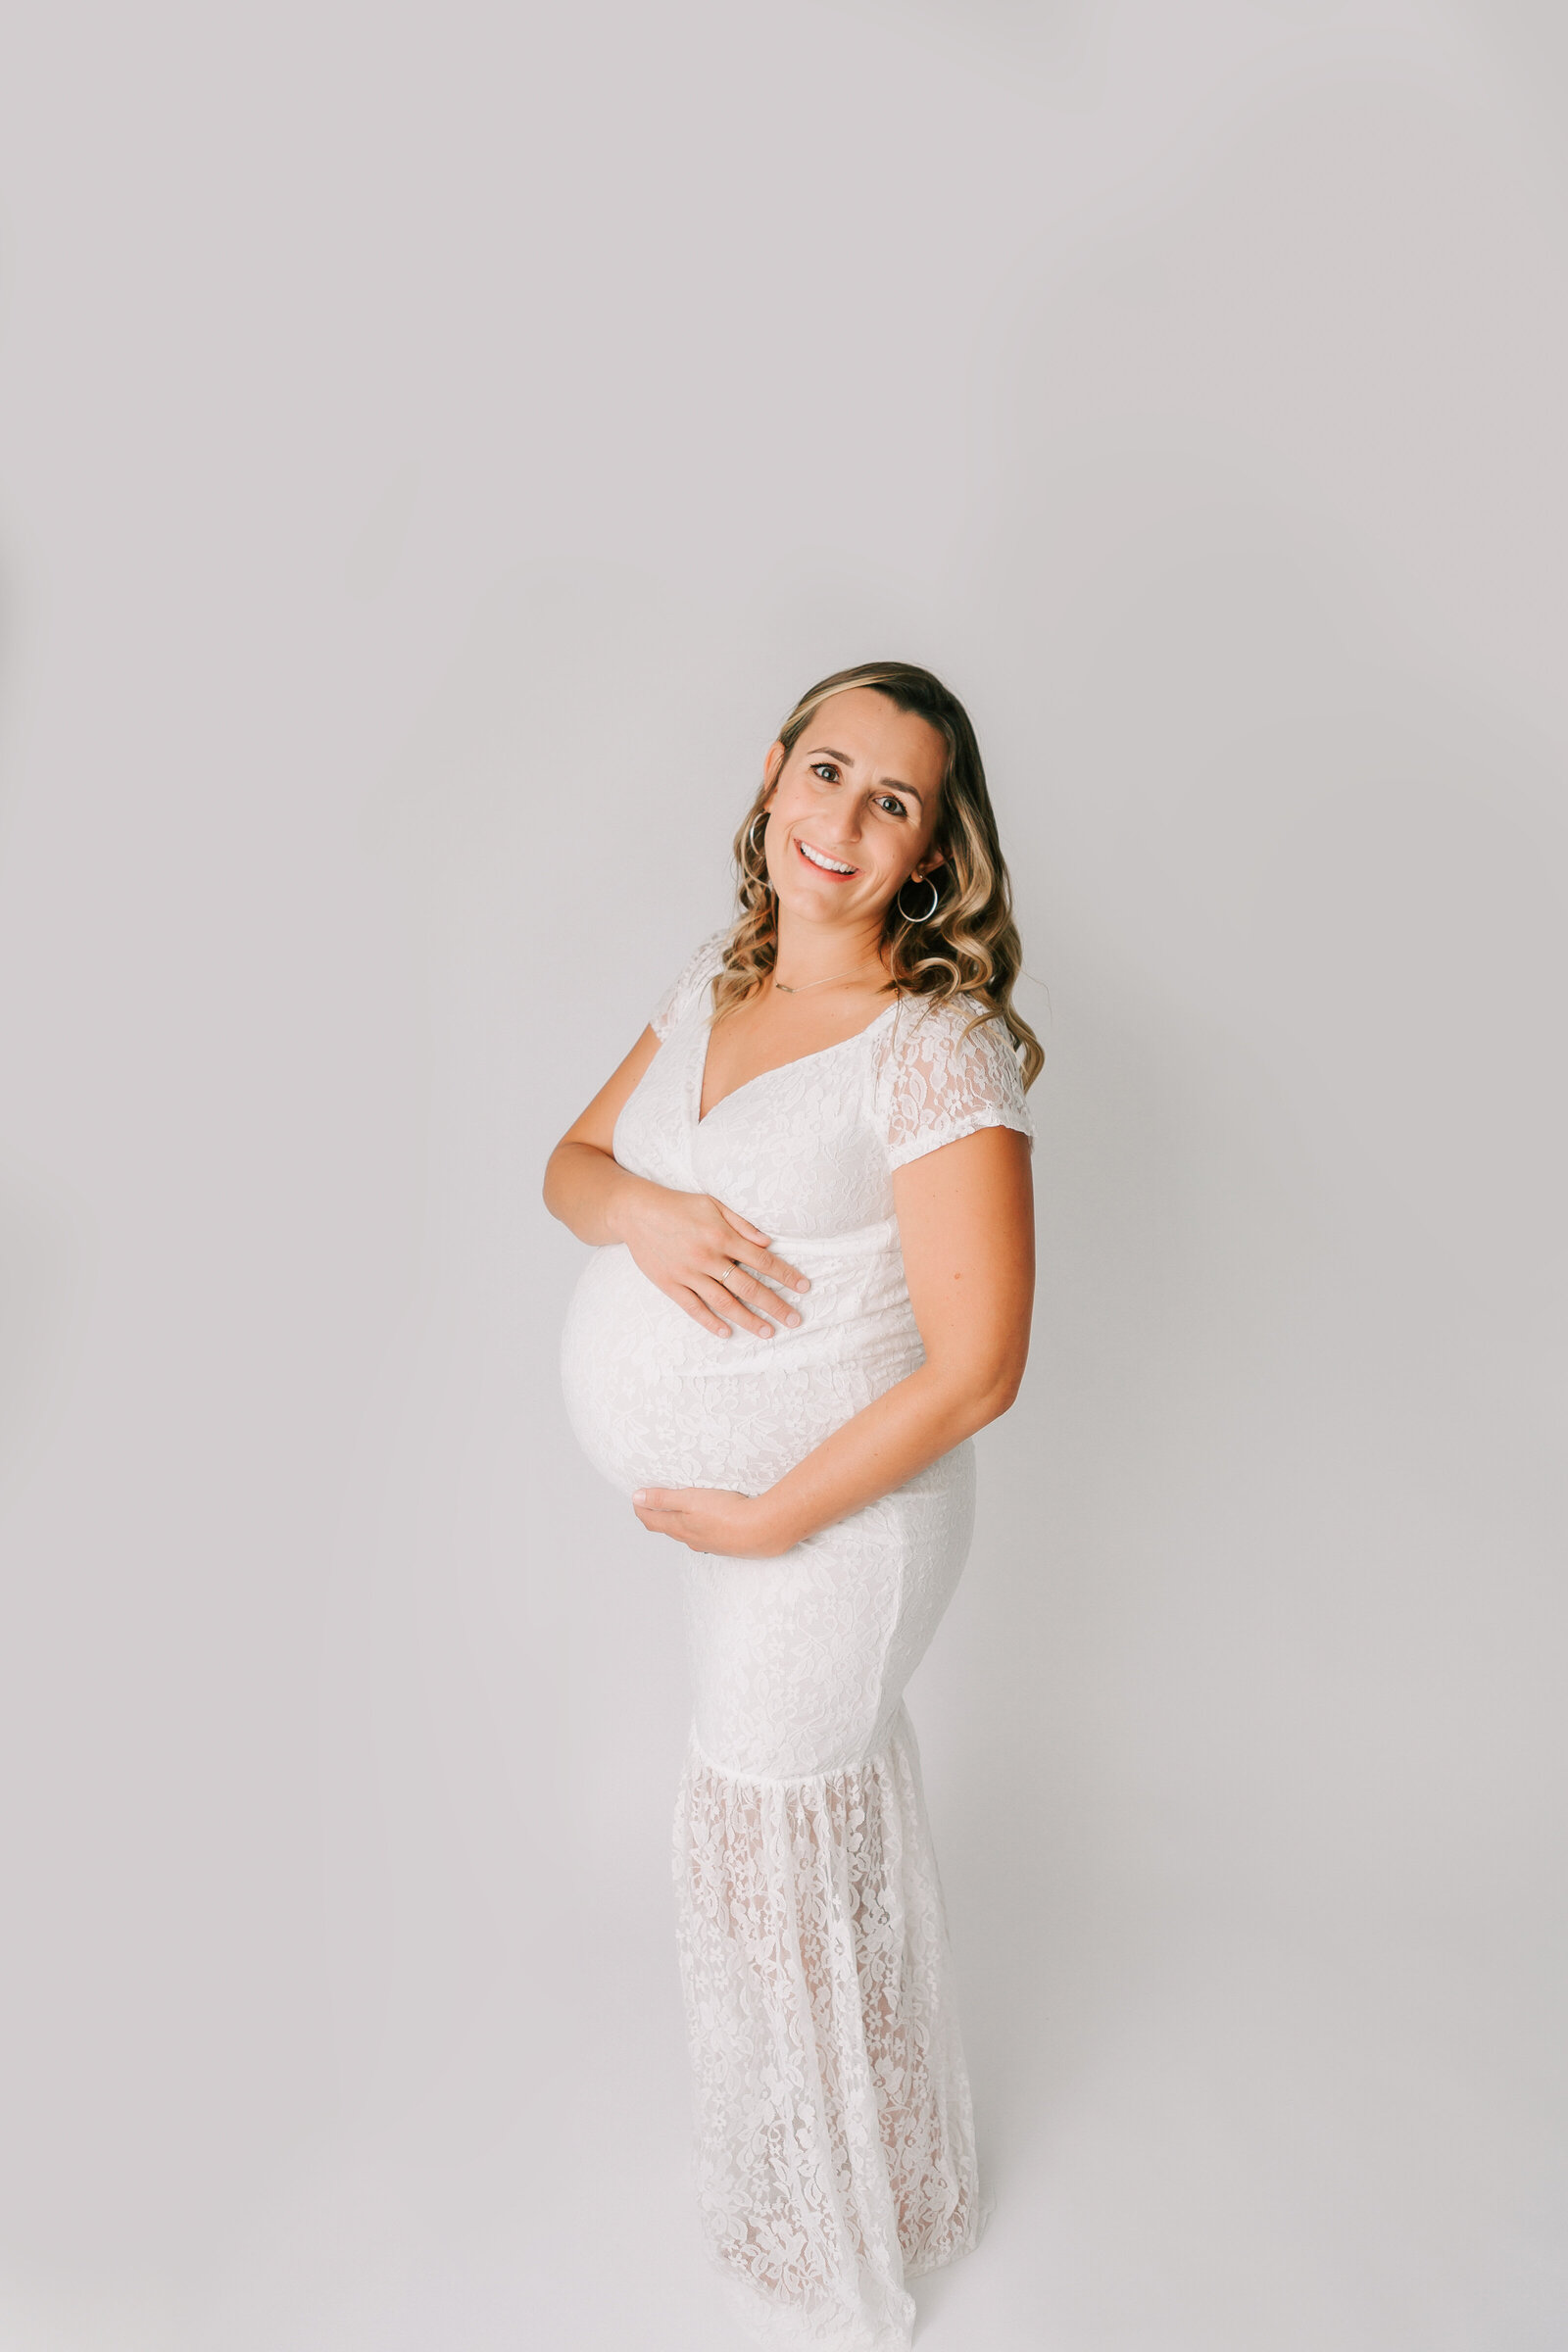 Studion maternity photography. Woman is photographed wearing a white lace dress that shows off her beautiful pregnant belly